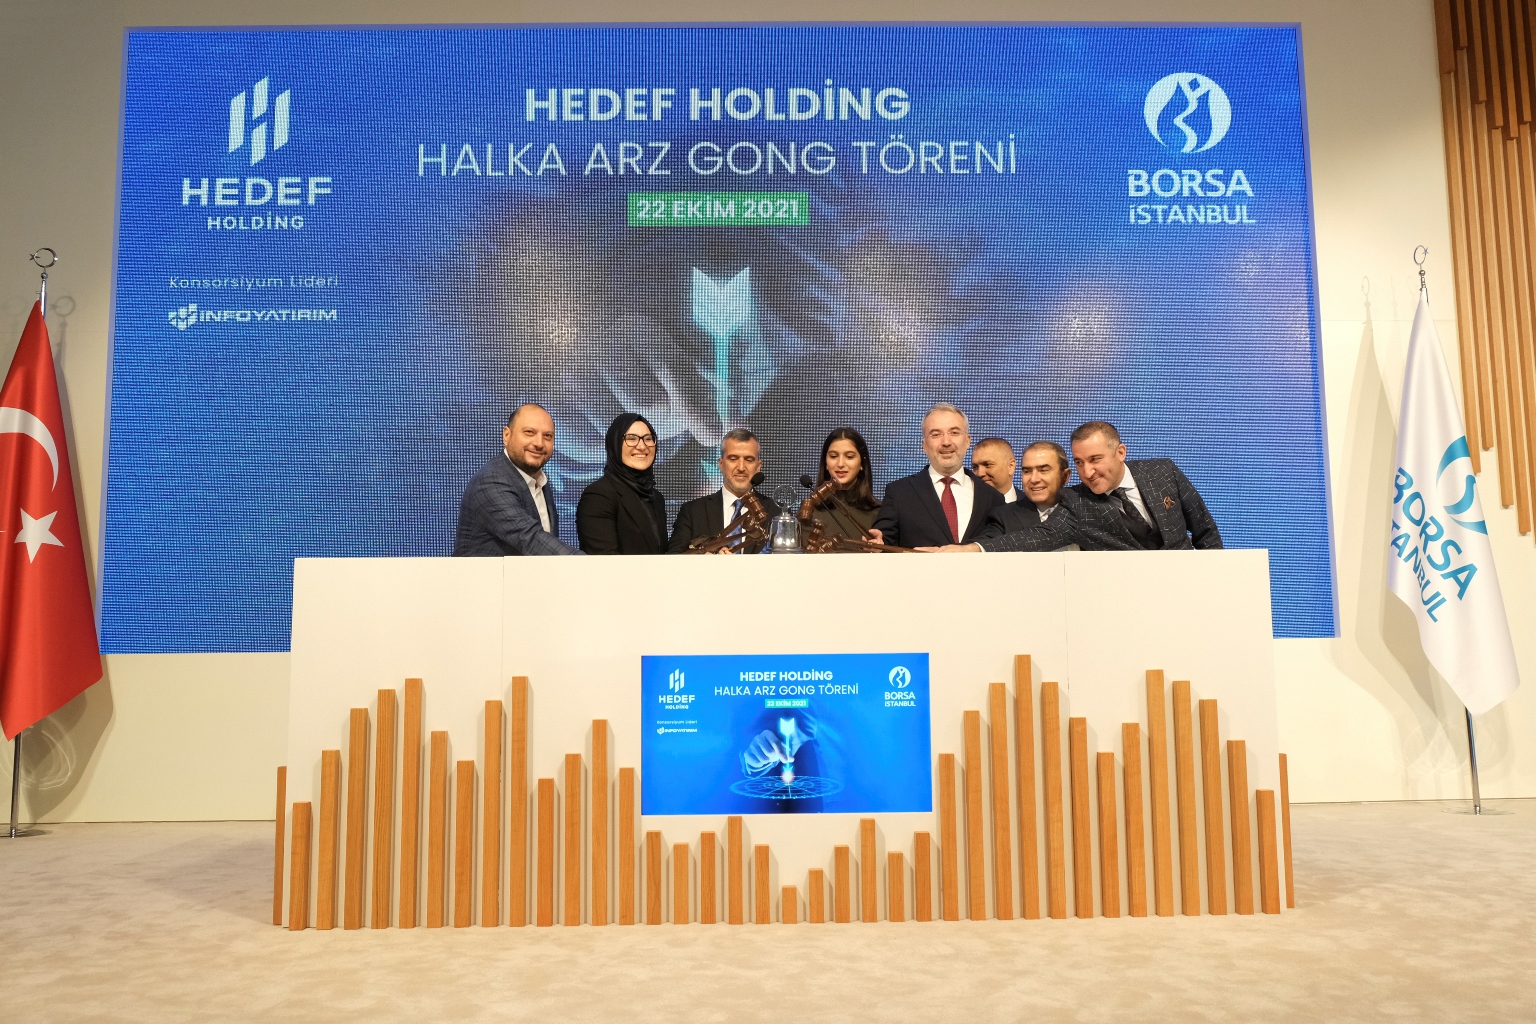 borsa istanbul s opening bell rang for hedef holding a s